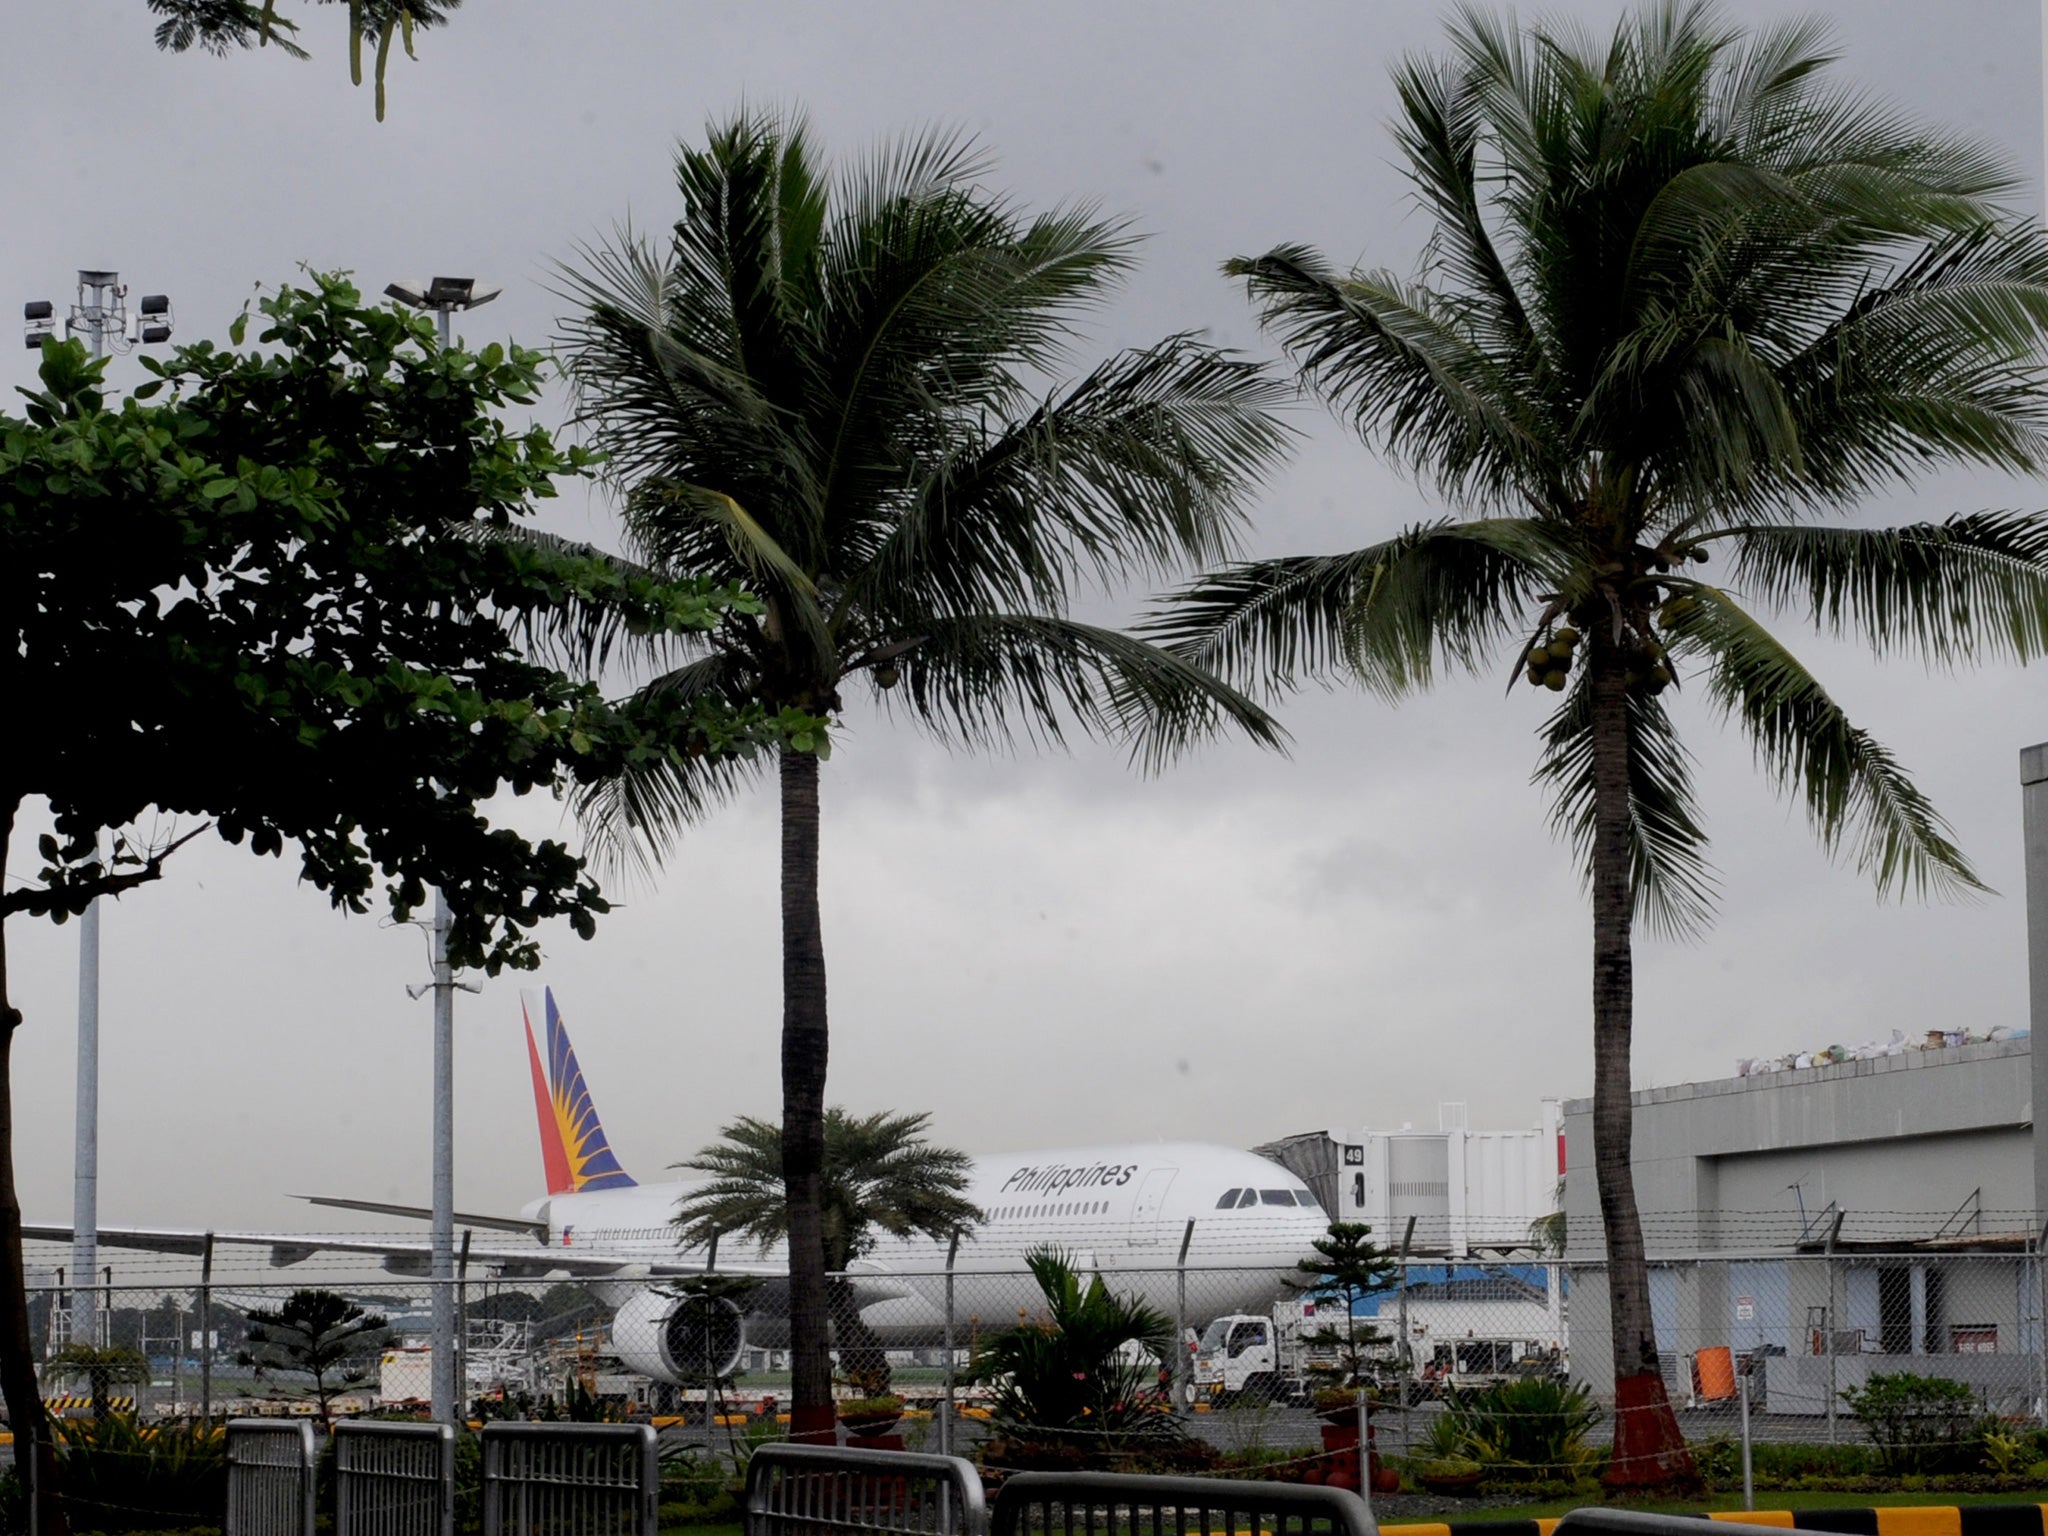 A Philippine Airlines jet stands on the tarmac at Manila's International airport as one of the most intense typhoons ever recorded tore into the Philippines